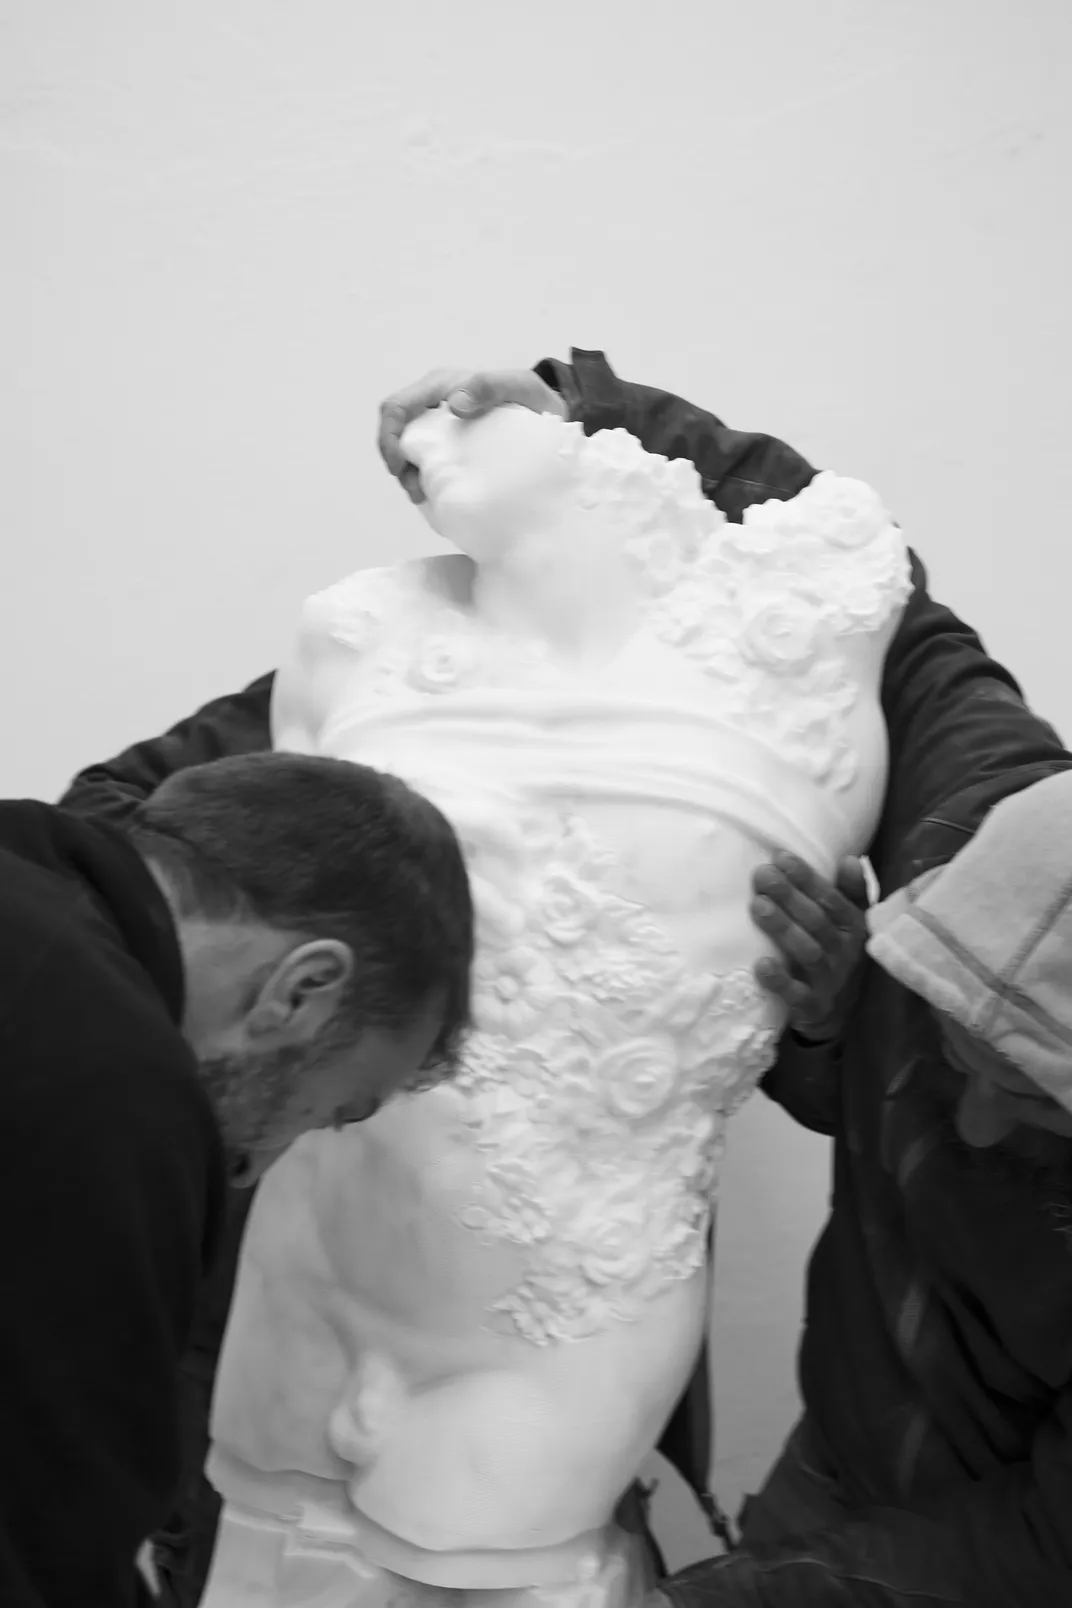 To design Flowered Slave, artist and Litix co-founder Filippo Tincolini modified digital scans of Michelangelo’s Dying Slave in part by adorning the bust with blooming flowers.